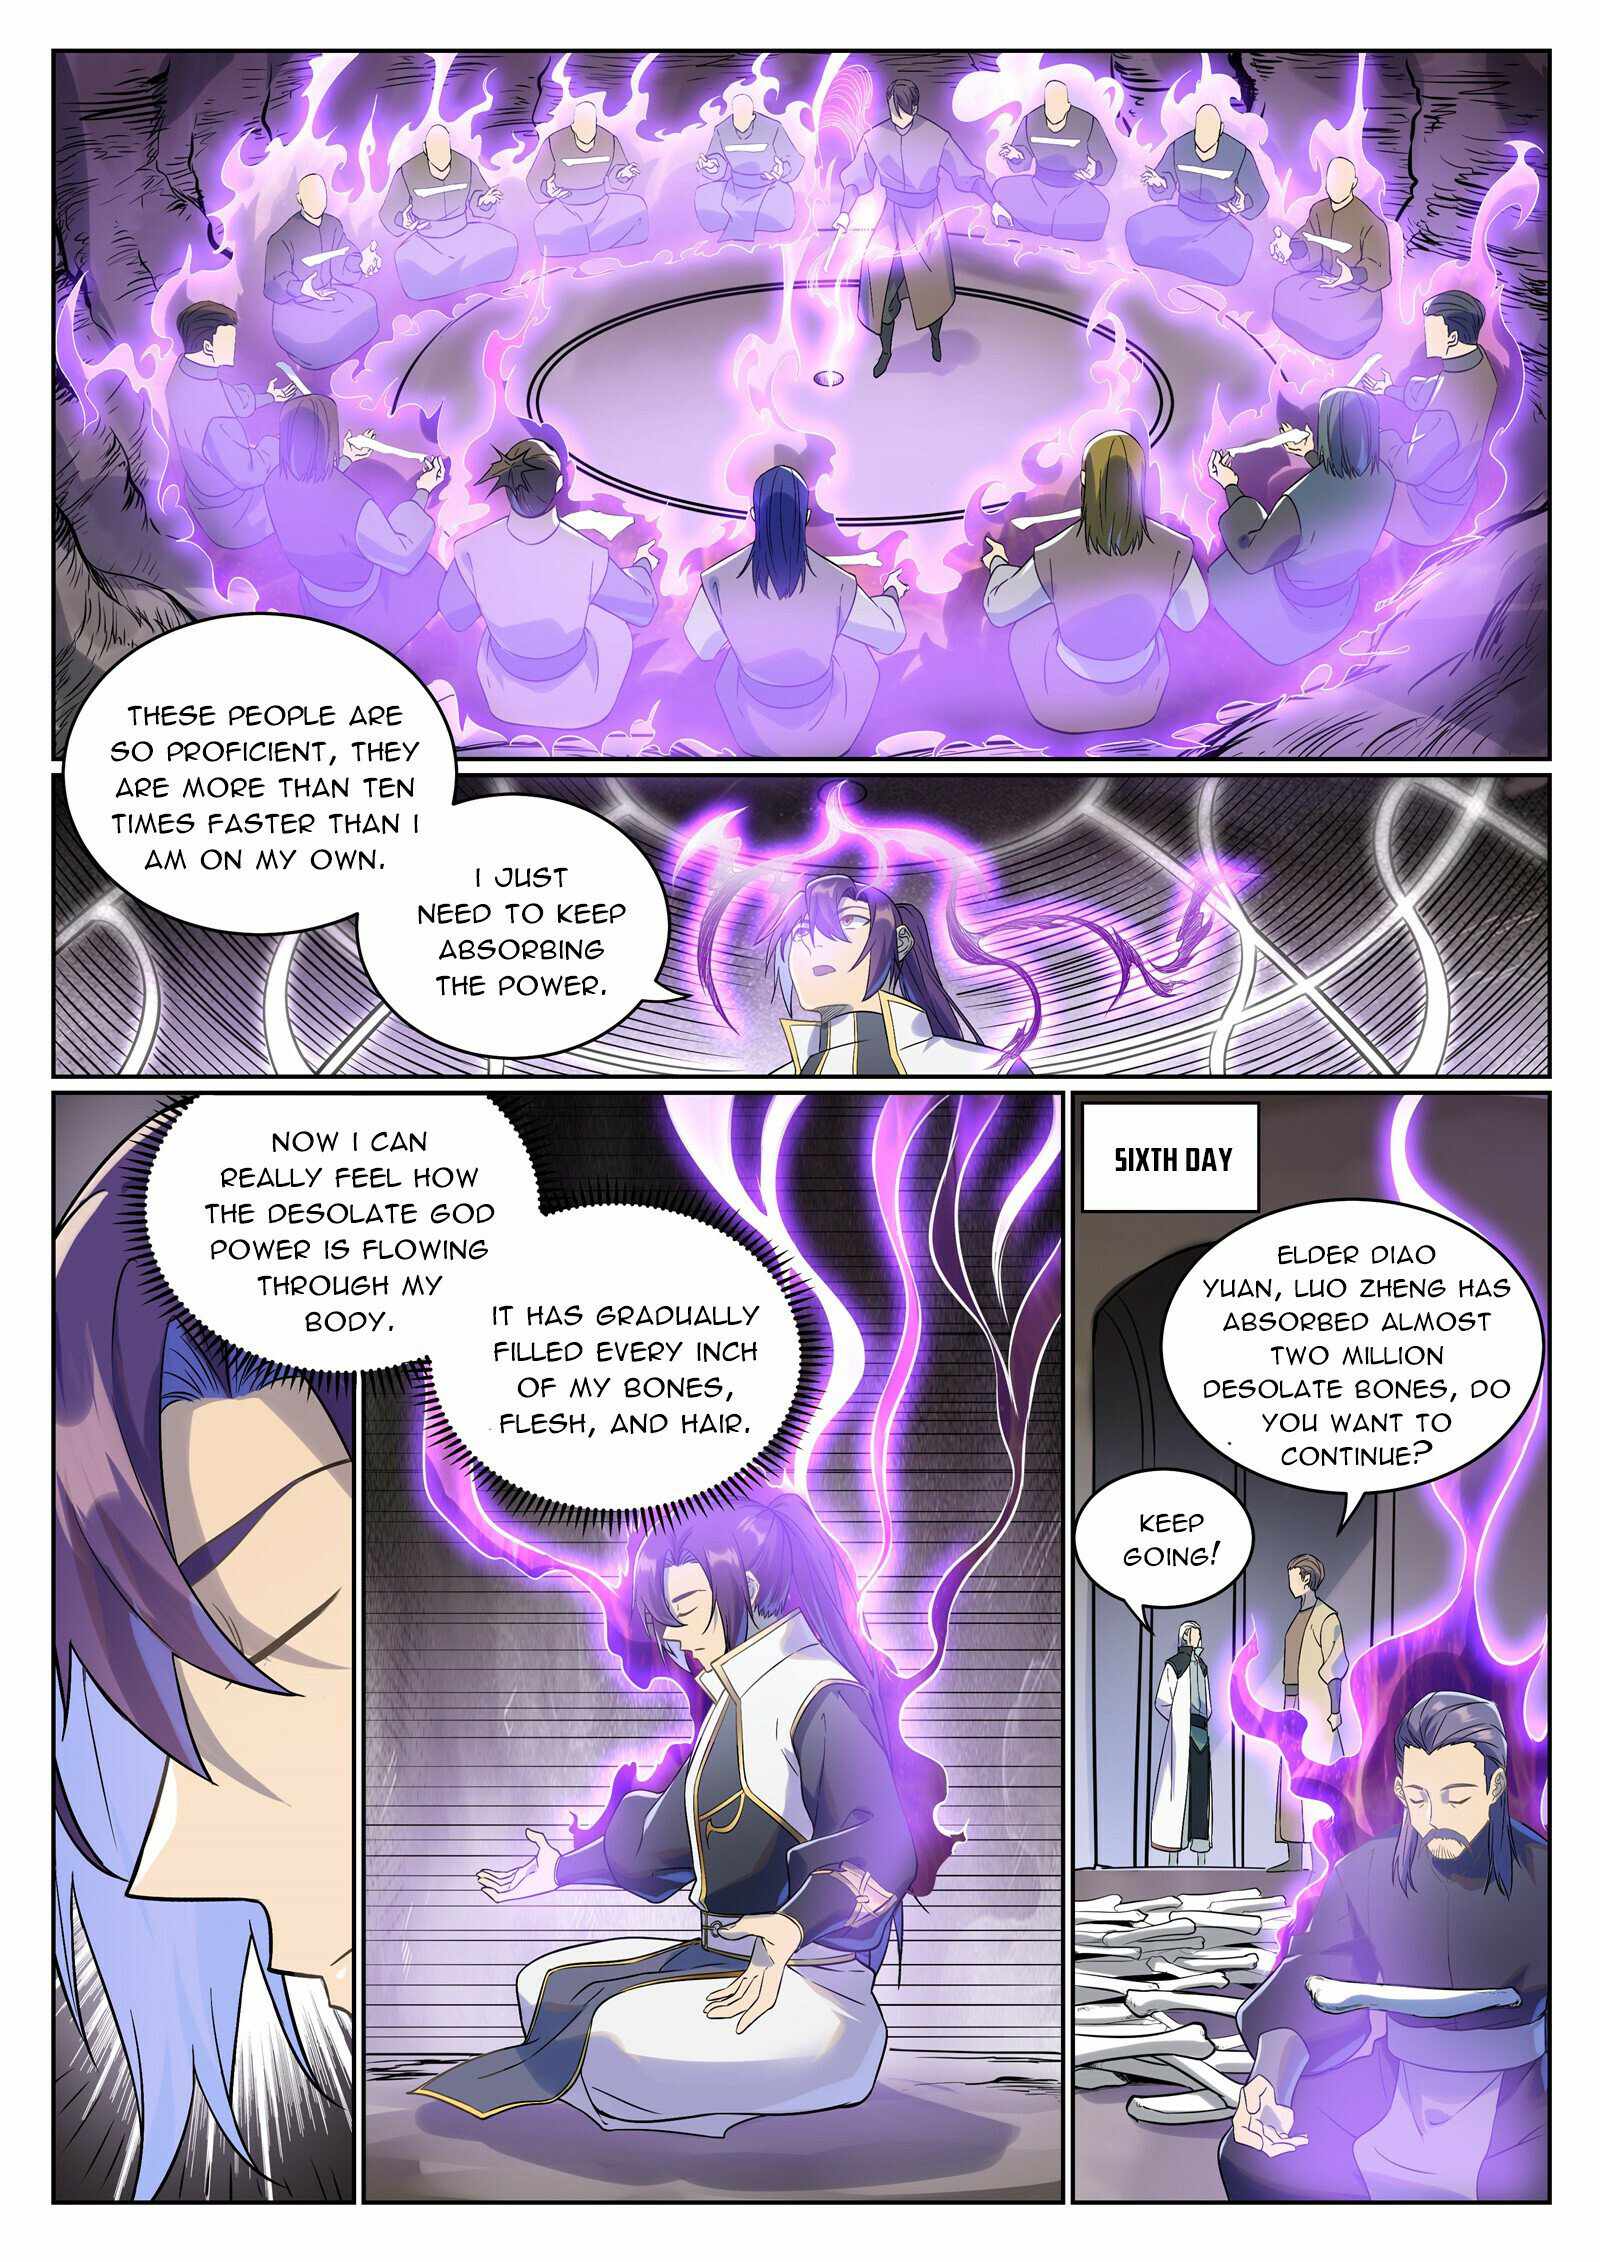 Apotheosis - Elevation to the status of a god chapter 995 page 8